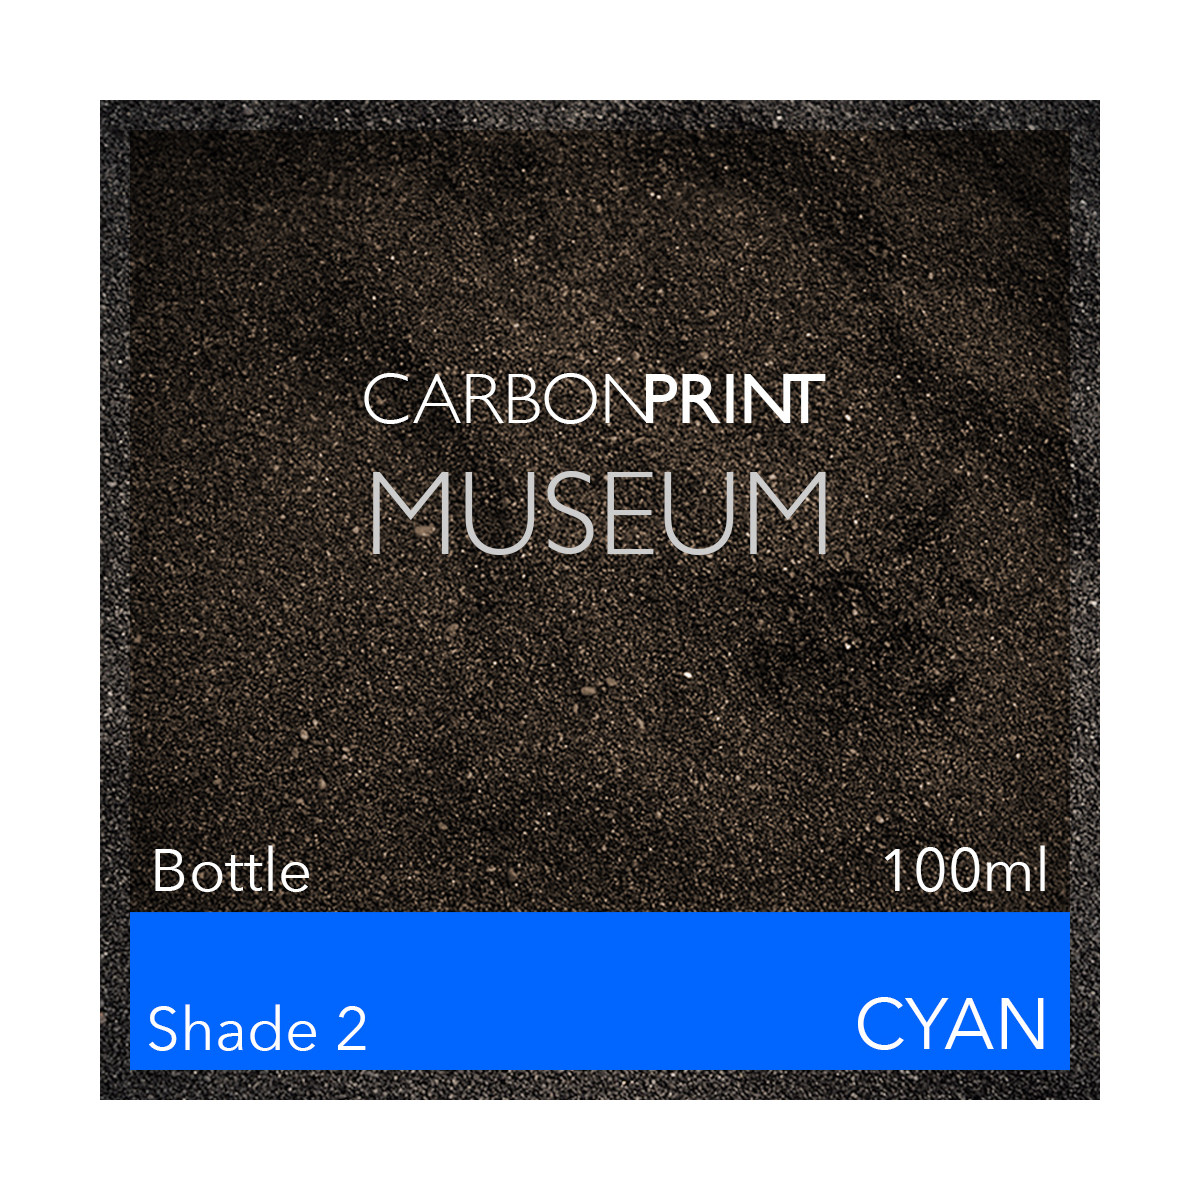 Carbonprint Museum Shade2 Channel C 100ml